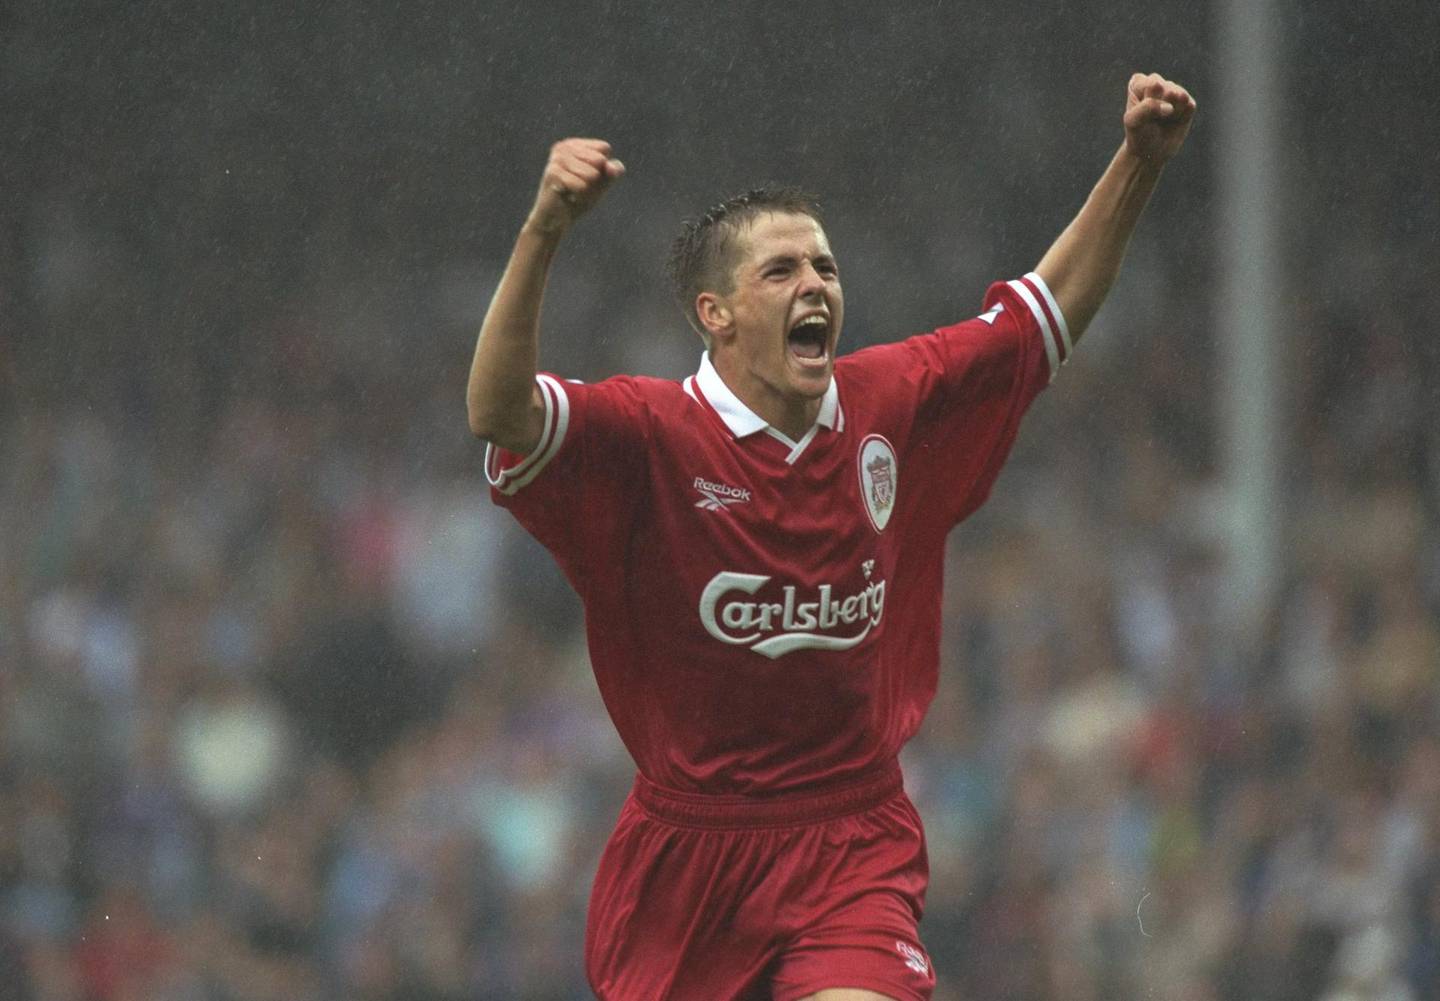 23 Aug 1997:  Michael Owen of Liverpool celebrates a goal during the FA Carling Premiership match against B''ackburn Rovers at Ewood Park in Blackburn, England \ Mandatory Credit: Gary M Prior/Allsport